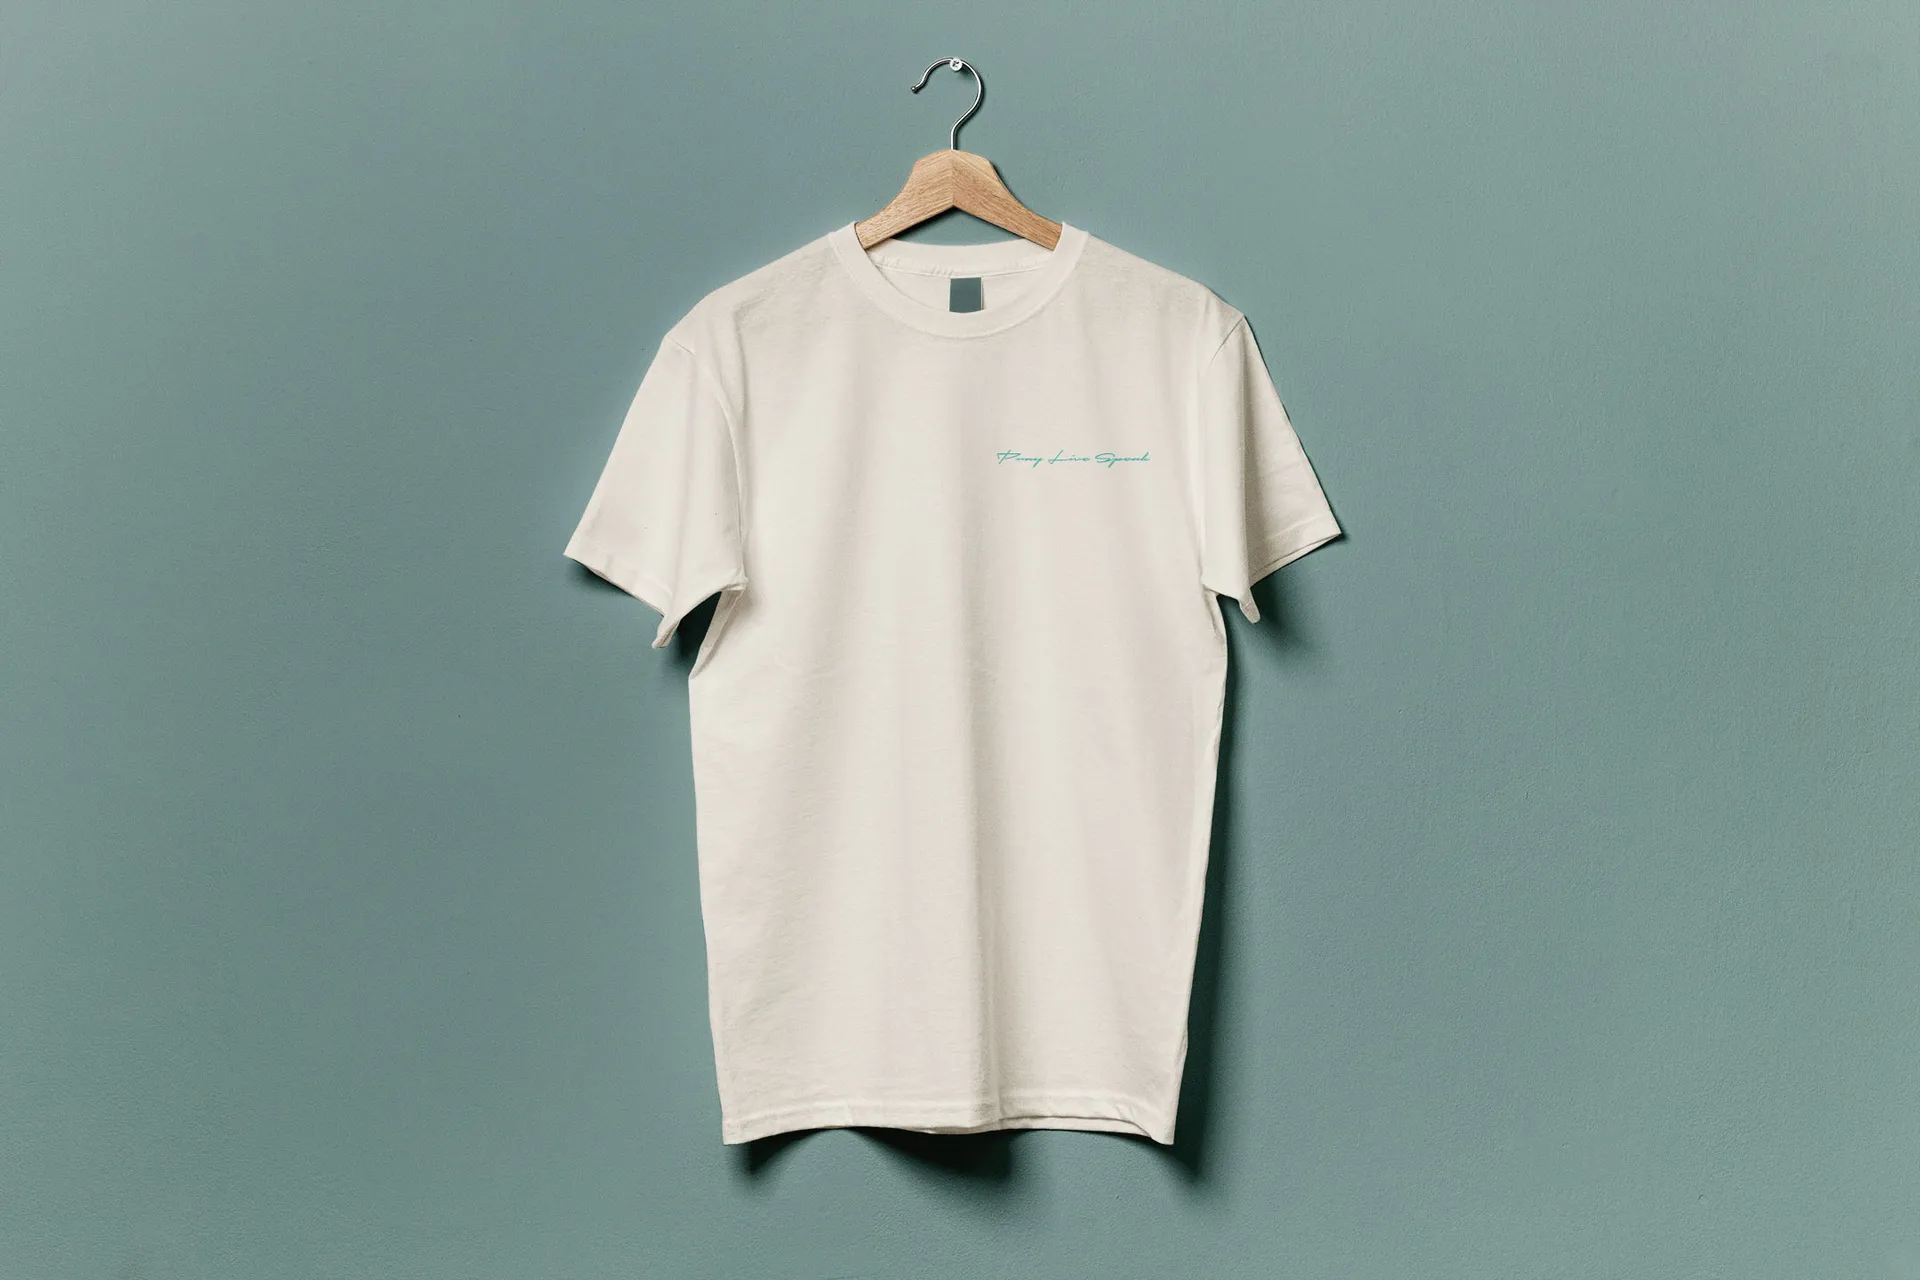 The t-shirt for this youth retreat, suspended on a wooden hanger against a teal background